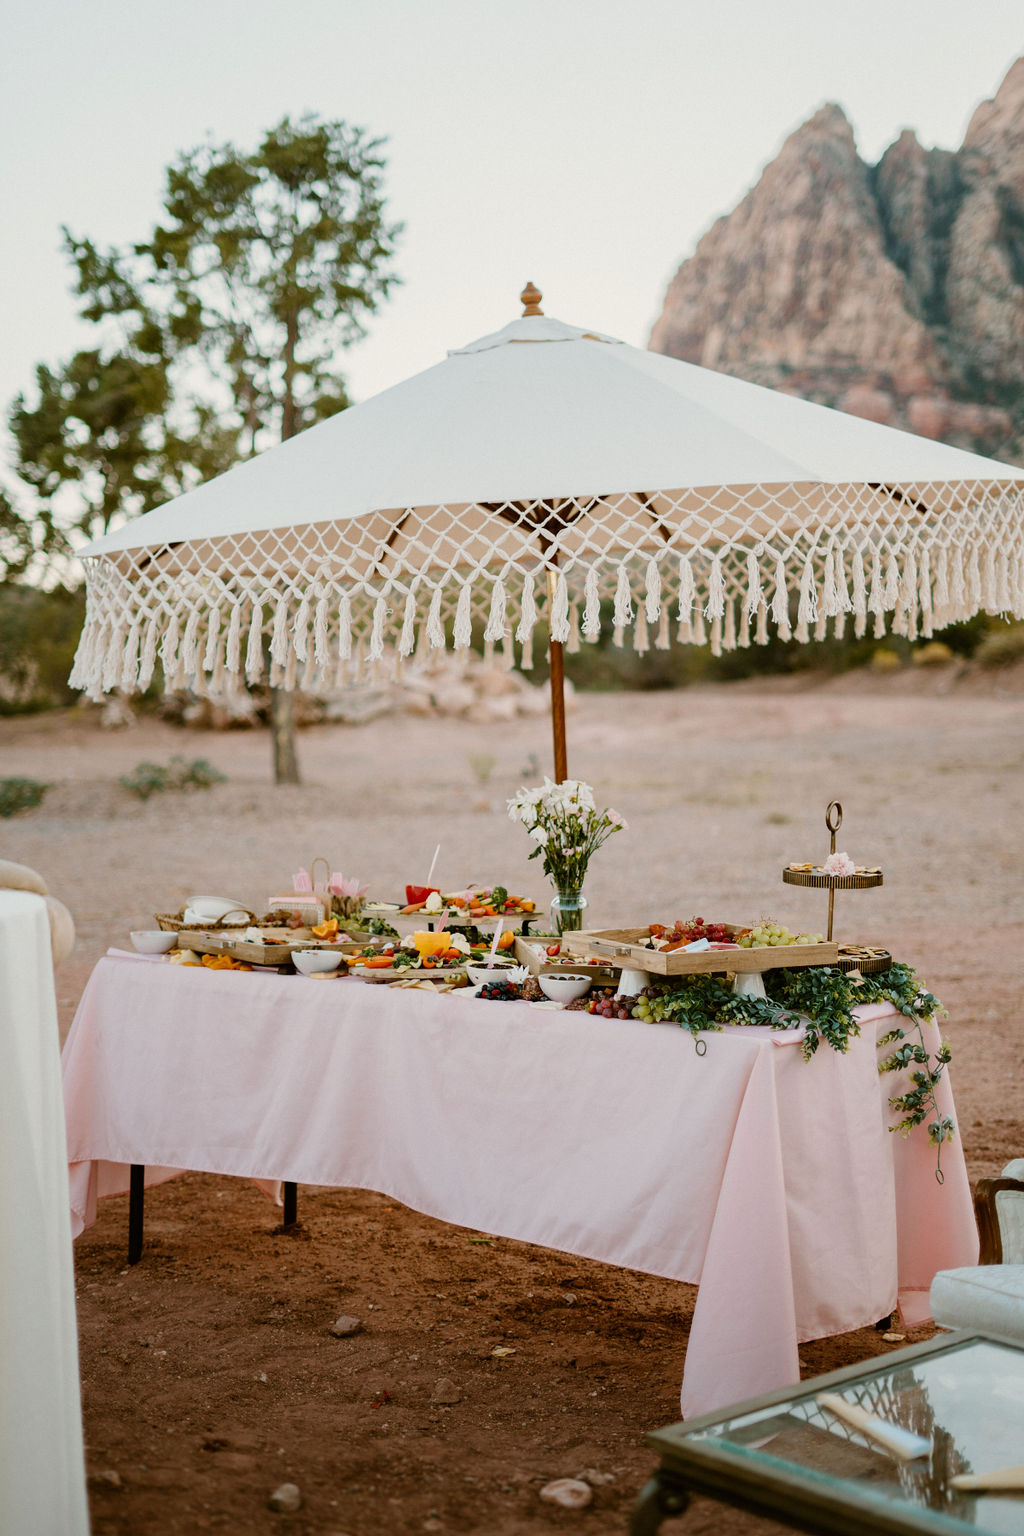 Outdoor buffet table covered with various dishes under a white umbrella, set against a backdrop of rugged mountains.